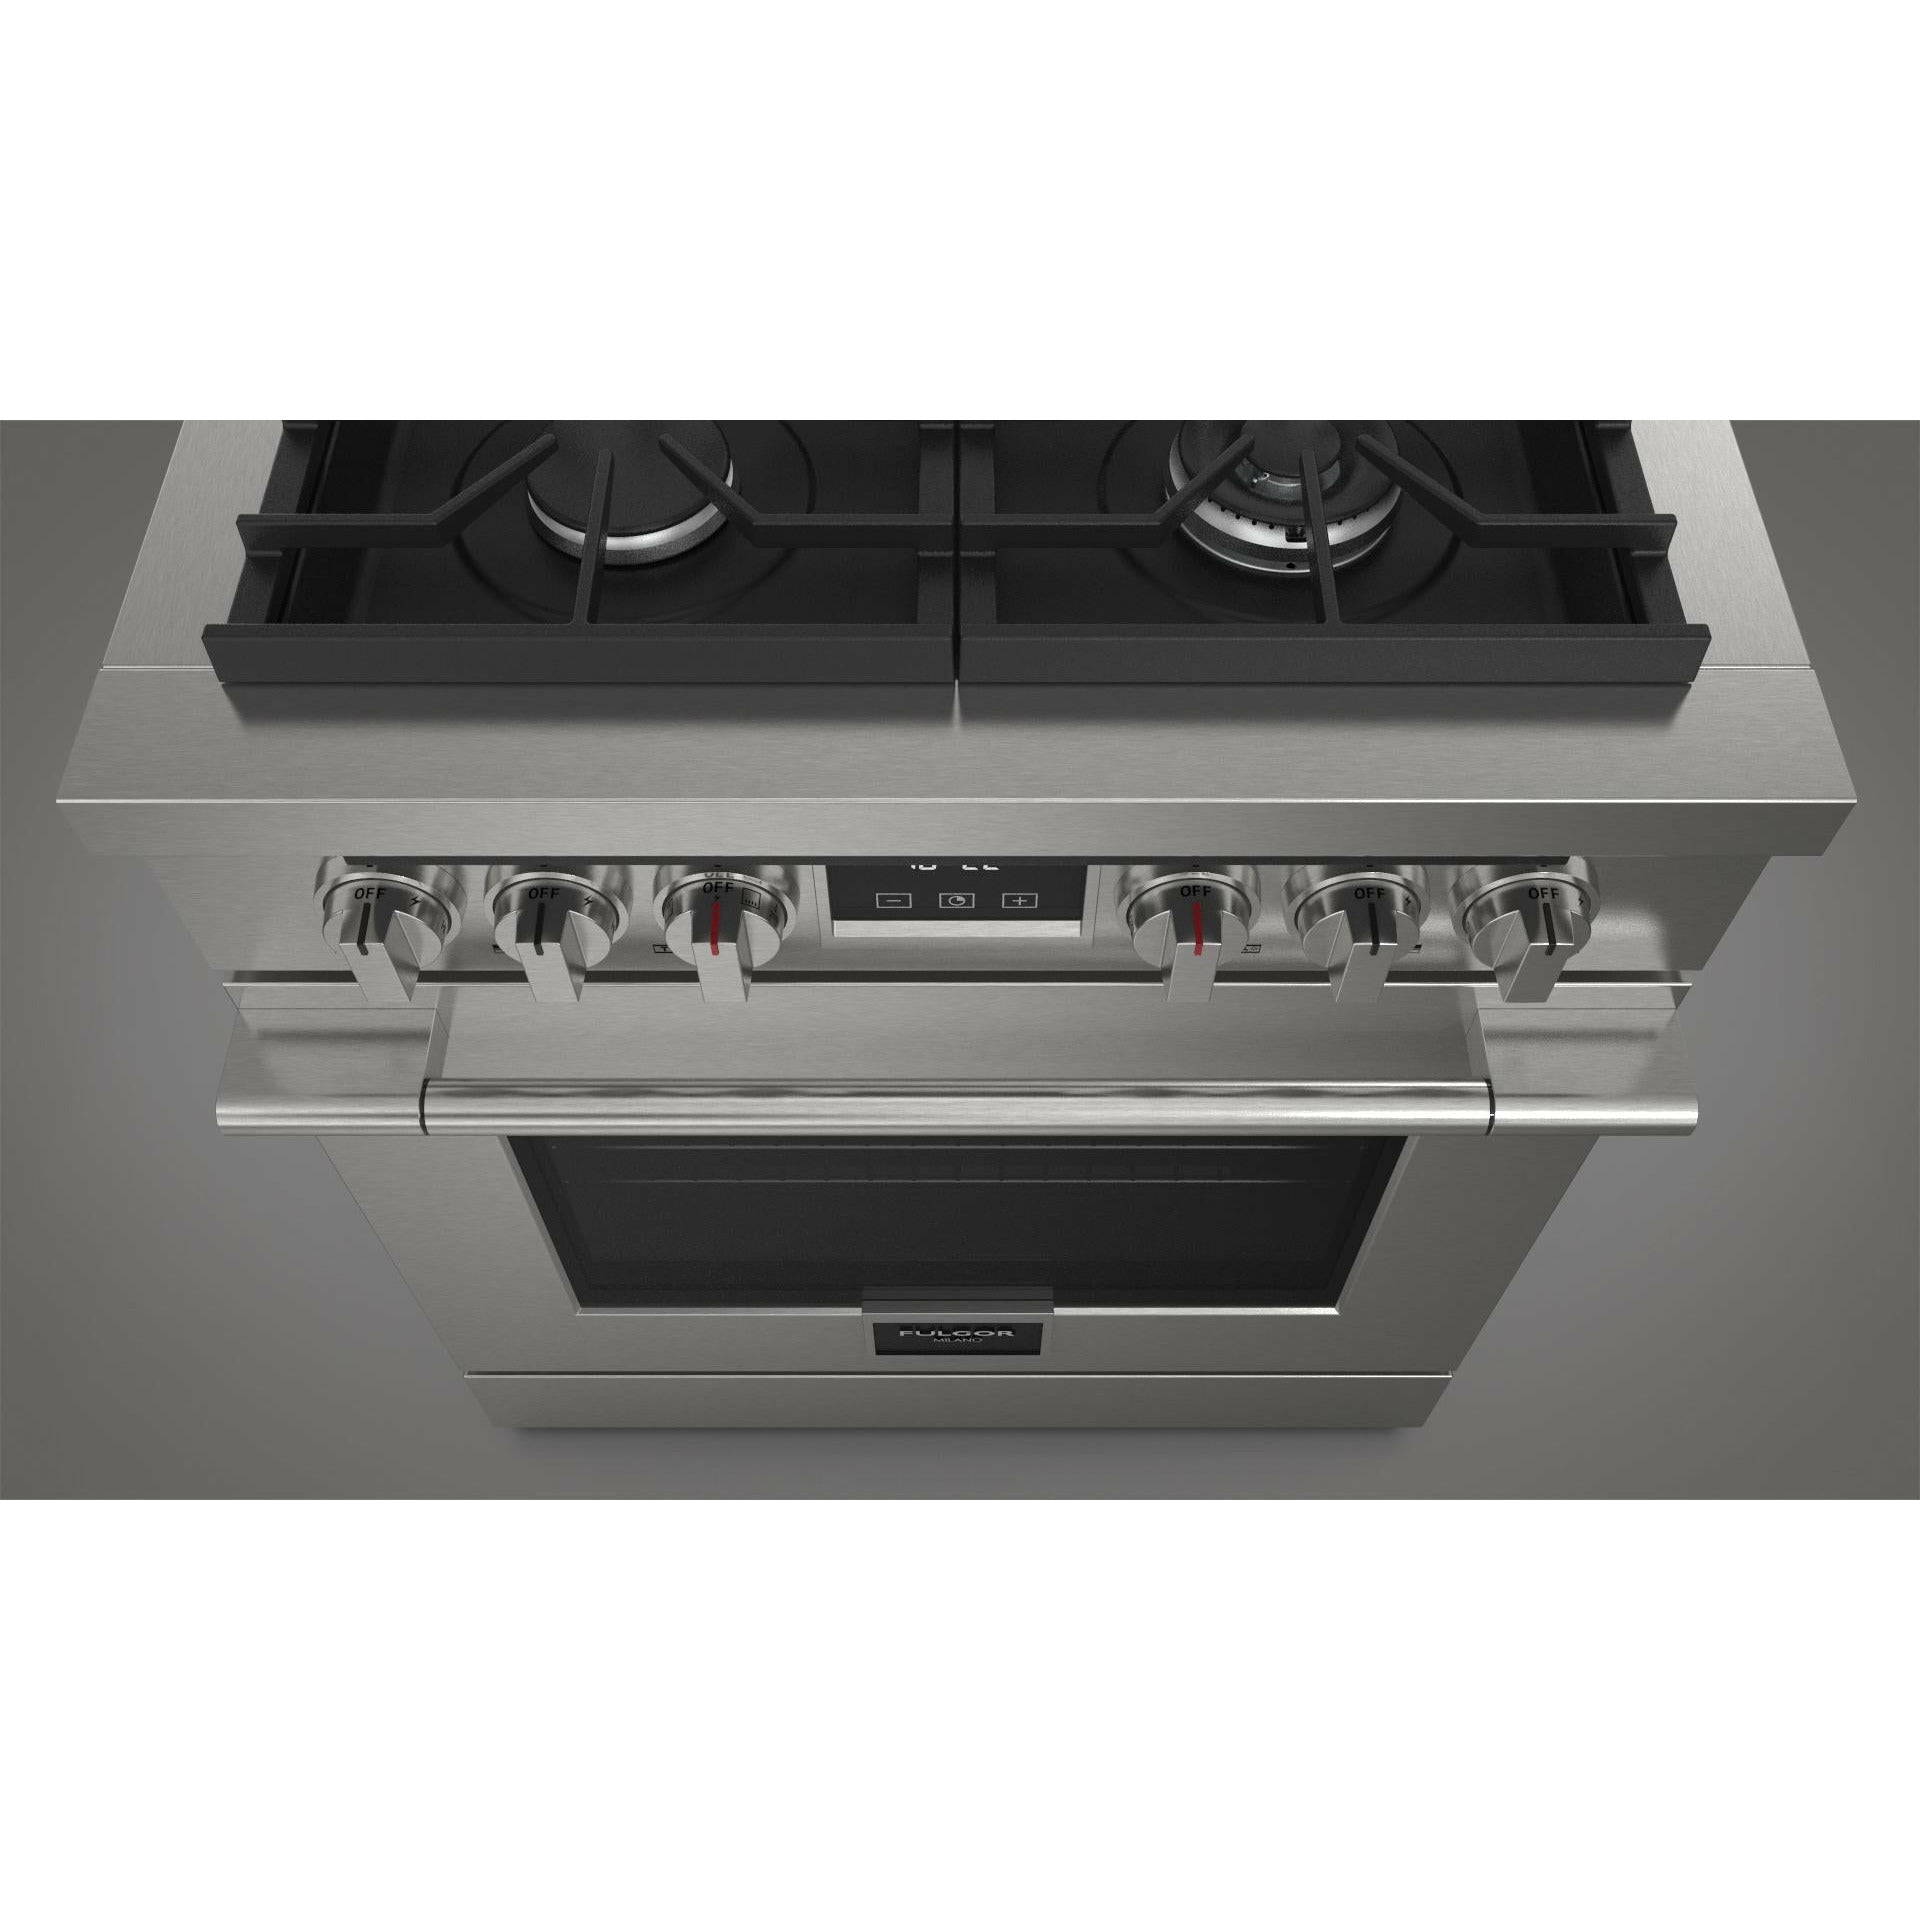 Fulgor Milano 30" Freestanding All Gas Range with 2 Duel Flame Burners, Stainless Steel - F4PGR304S2